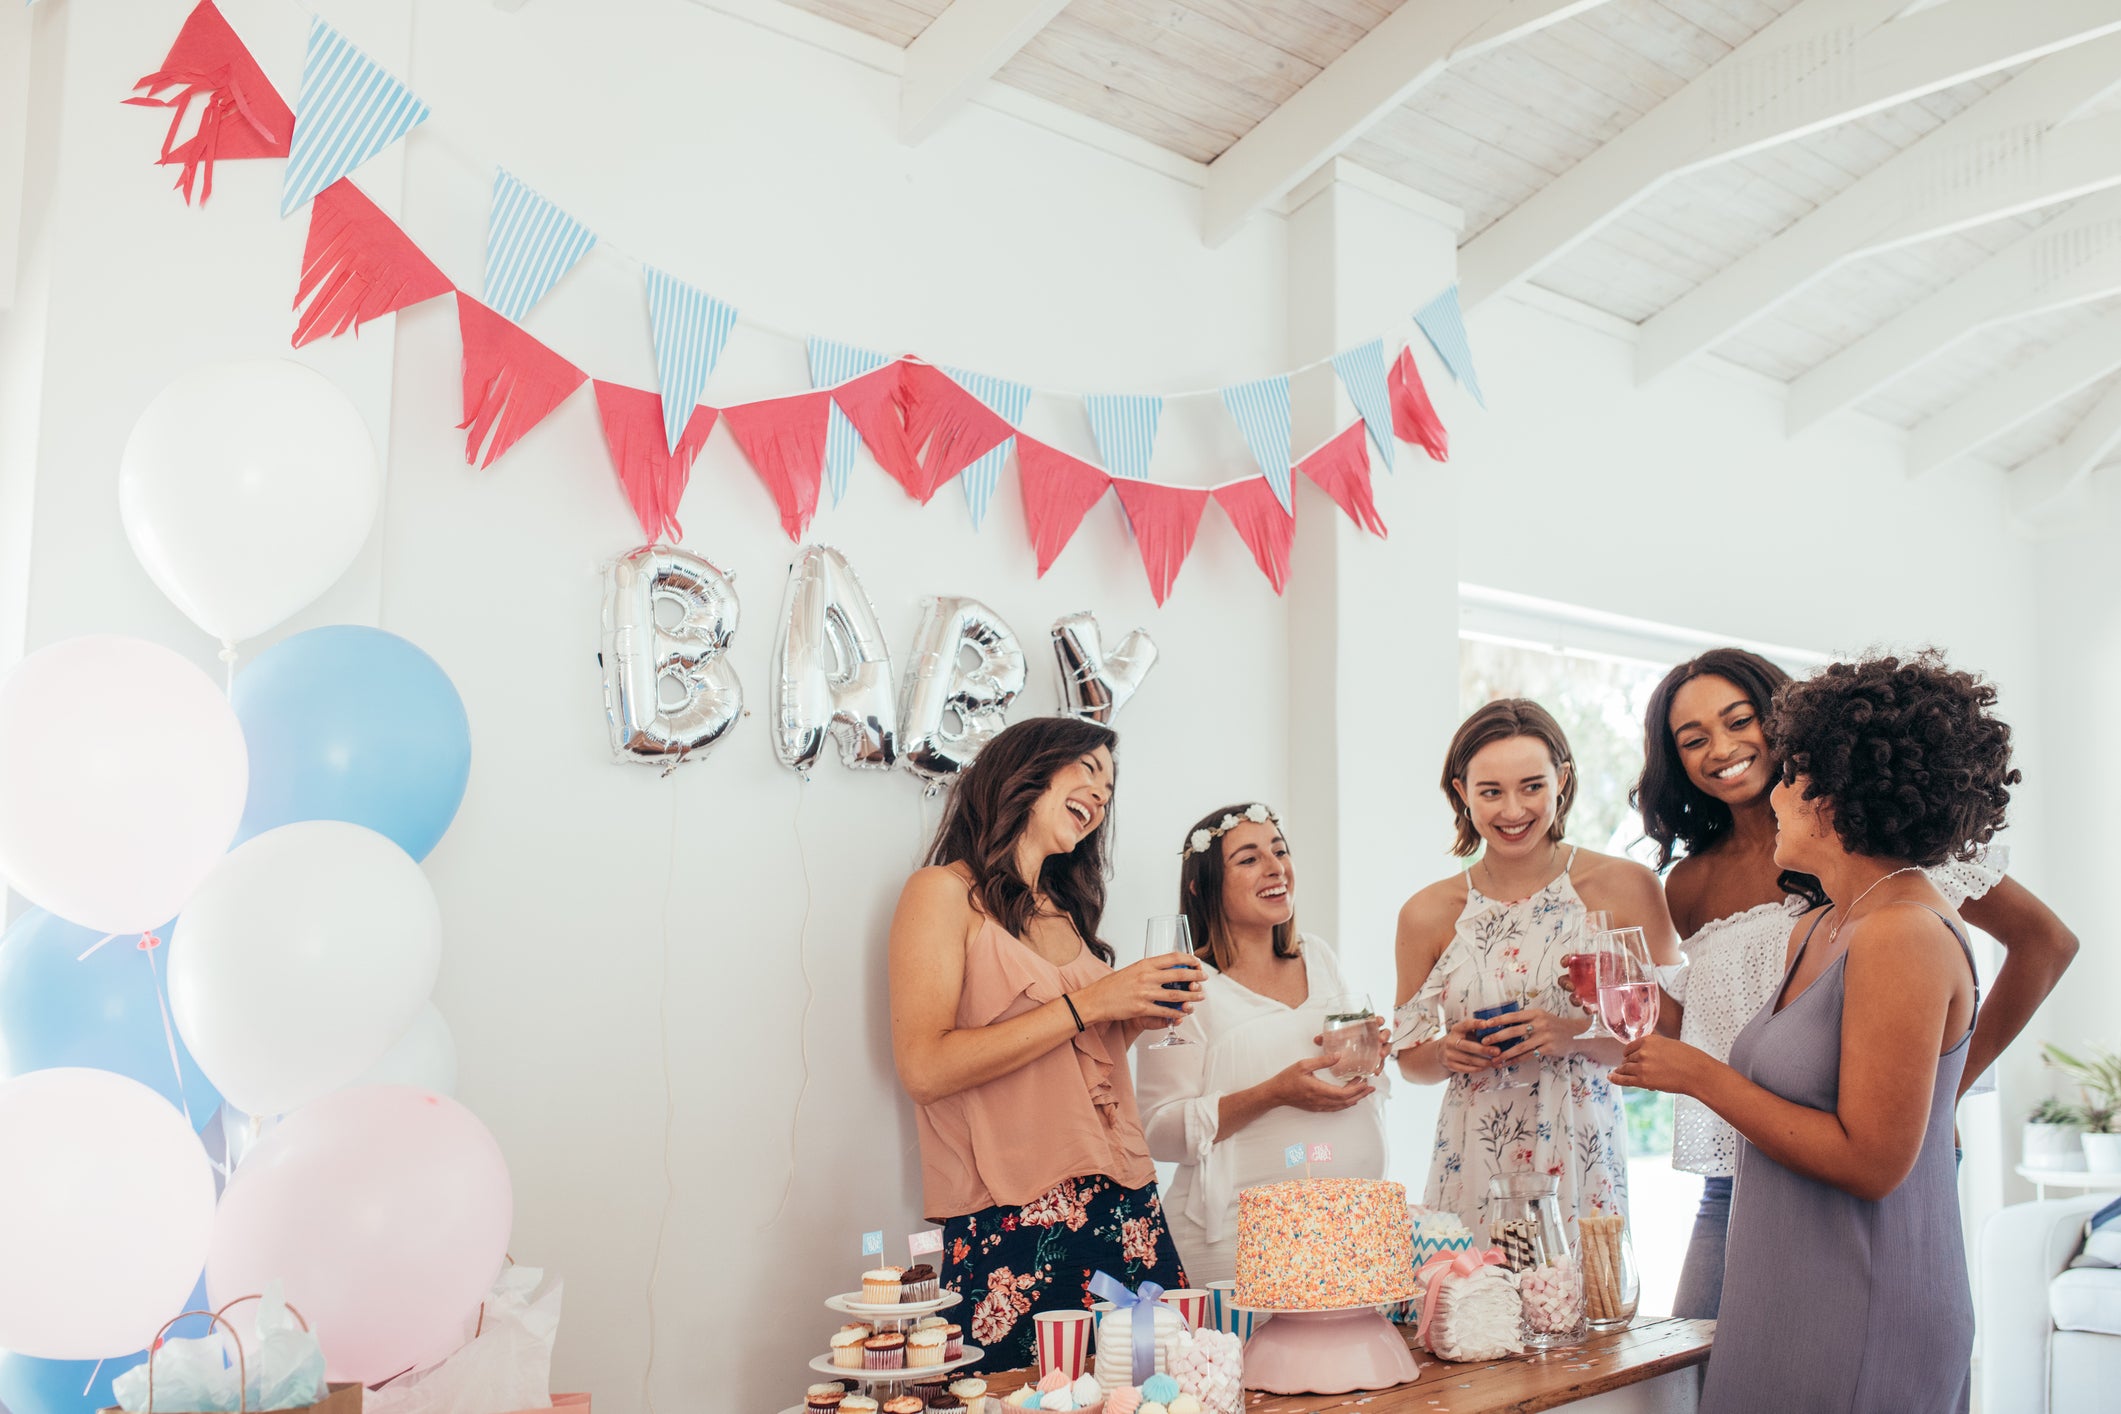 The 10 Best Baby Shower Games To Get The Party Going!